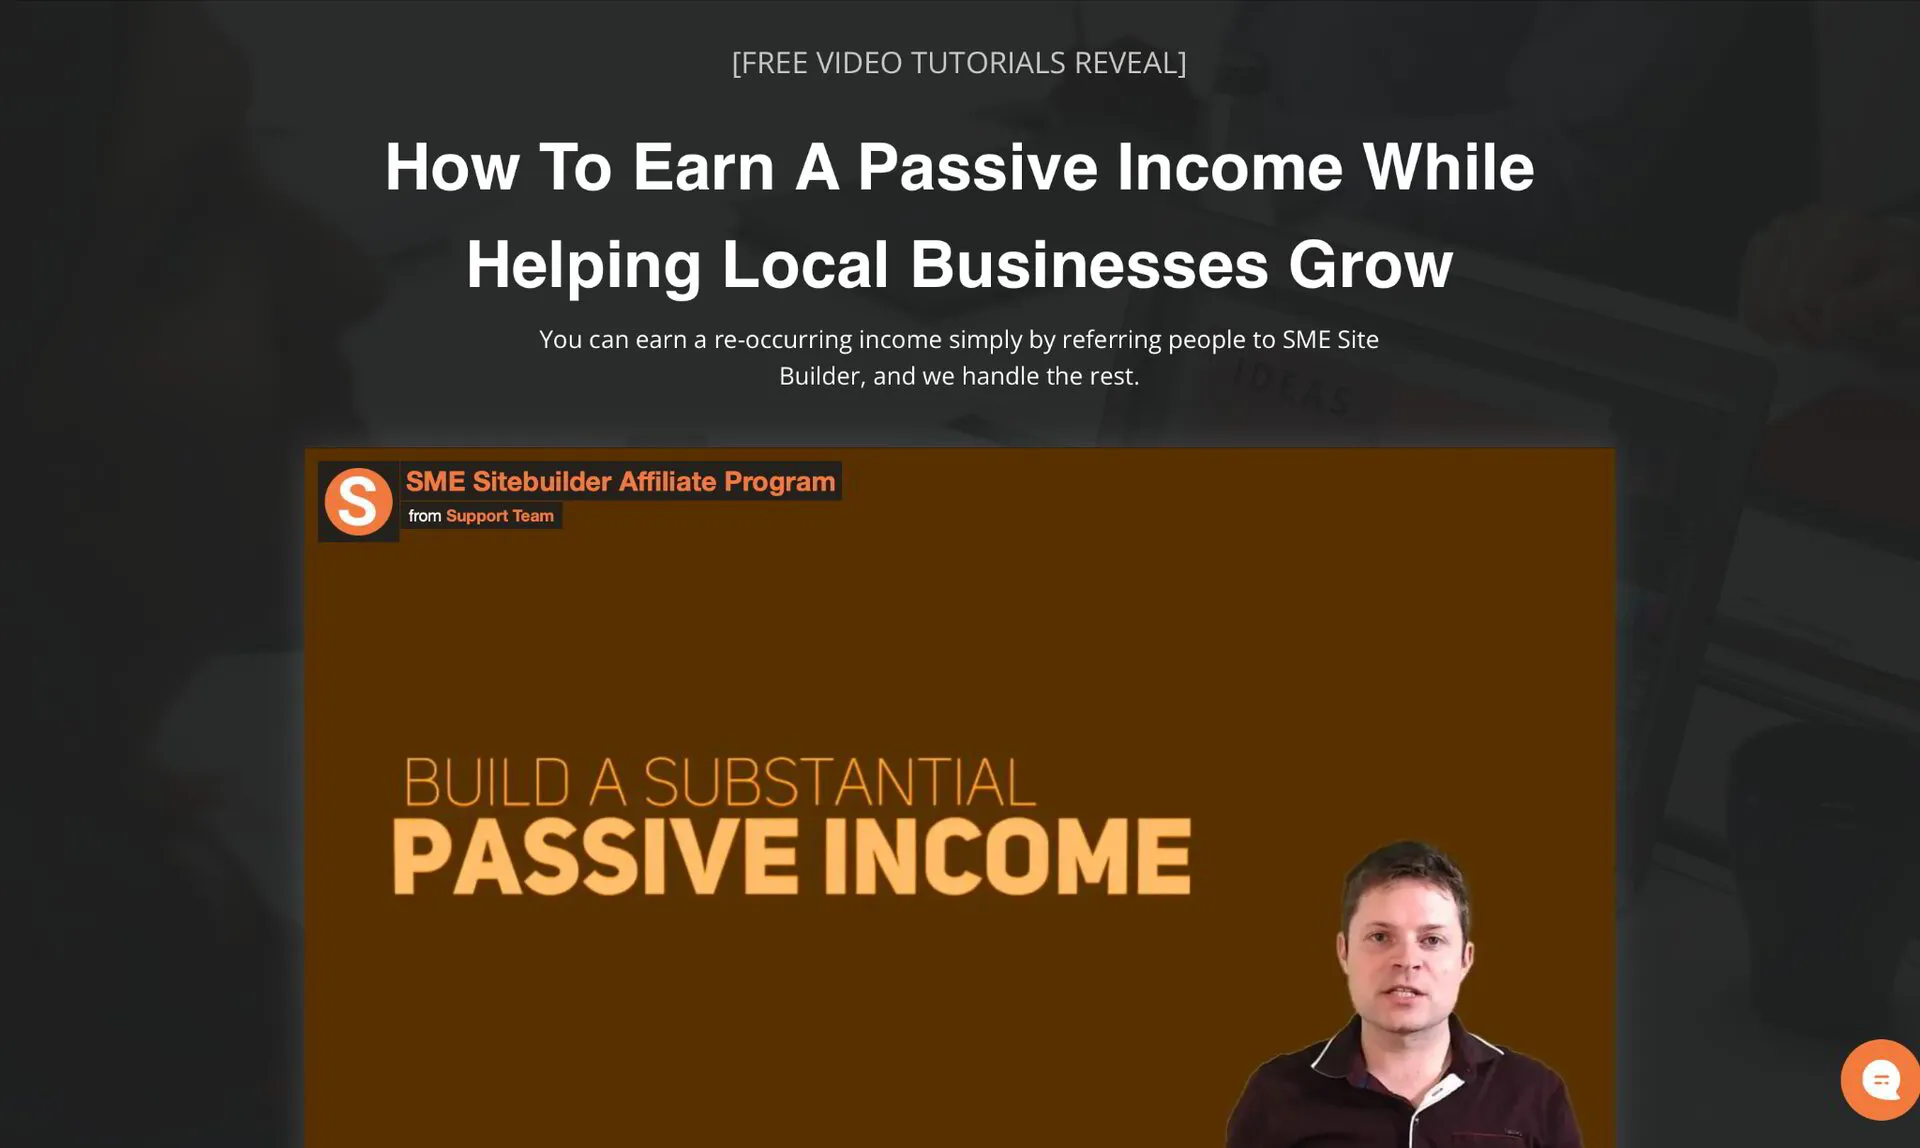 sme sitebuilder how to earn a passive income